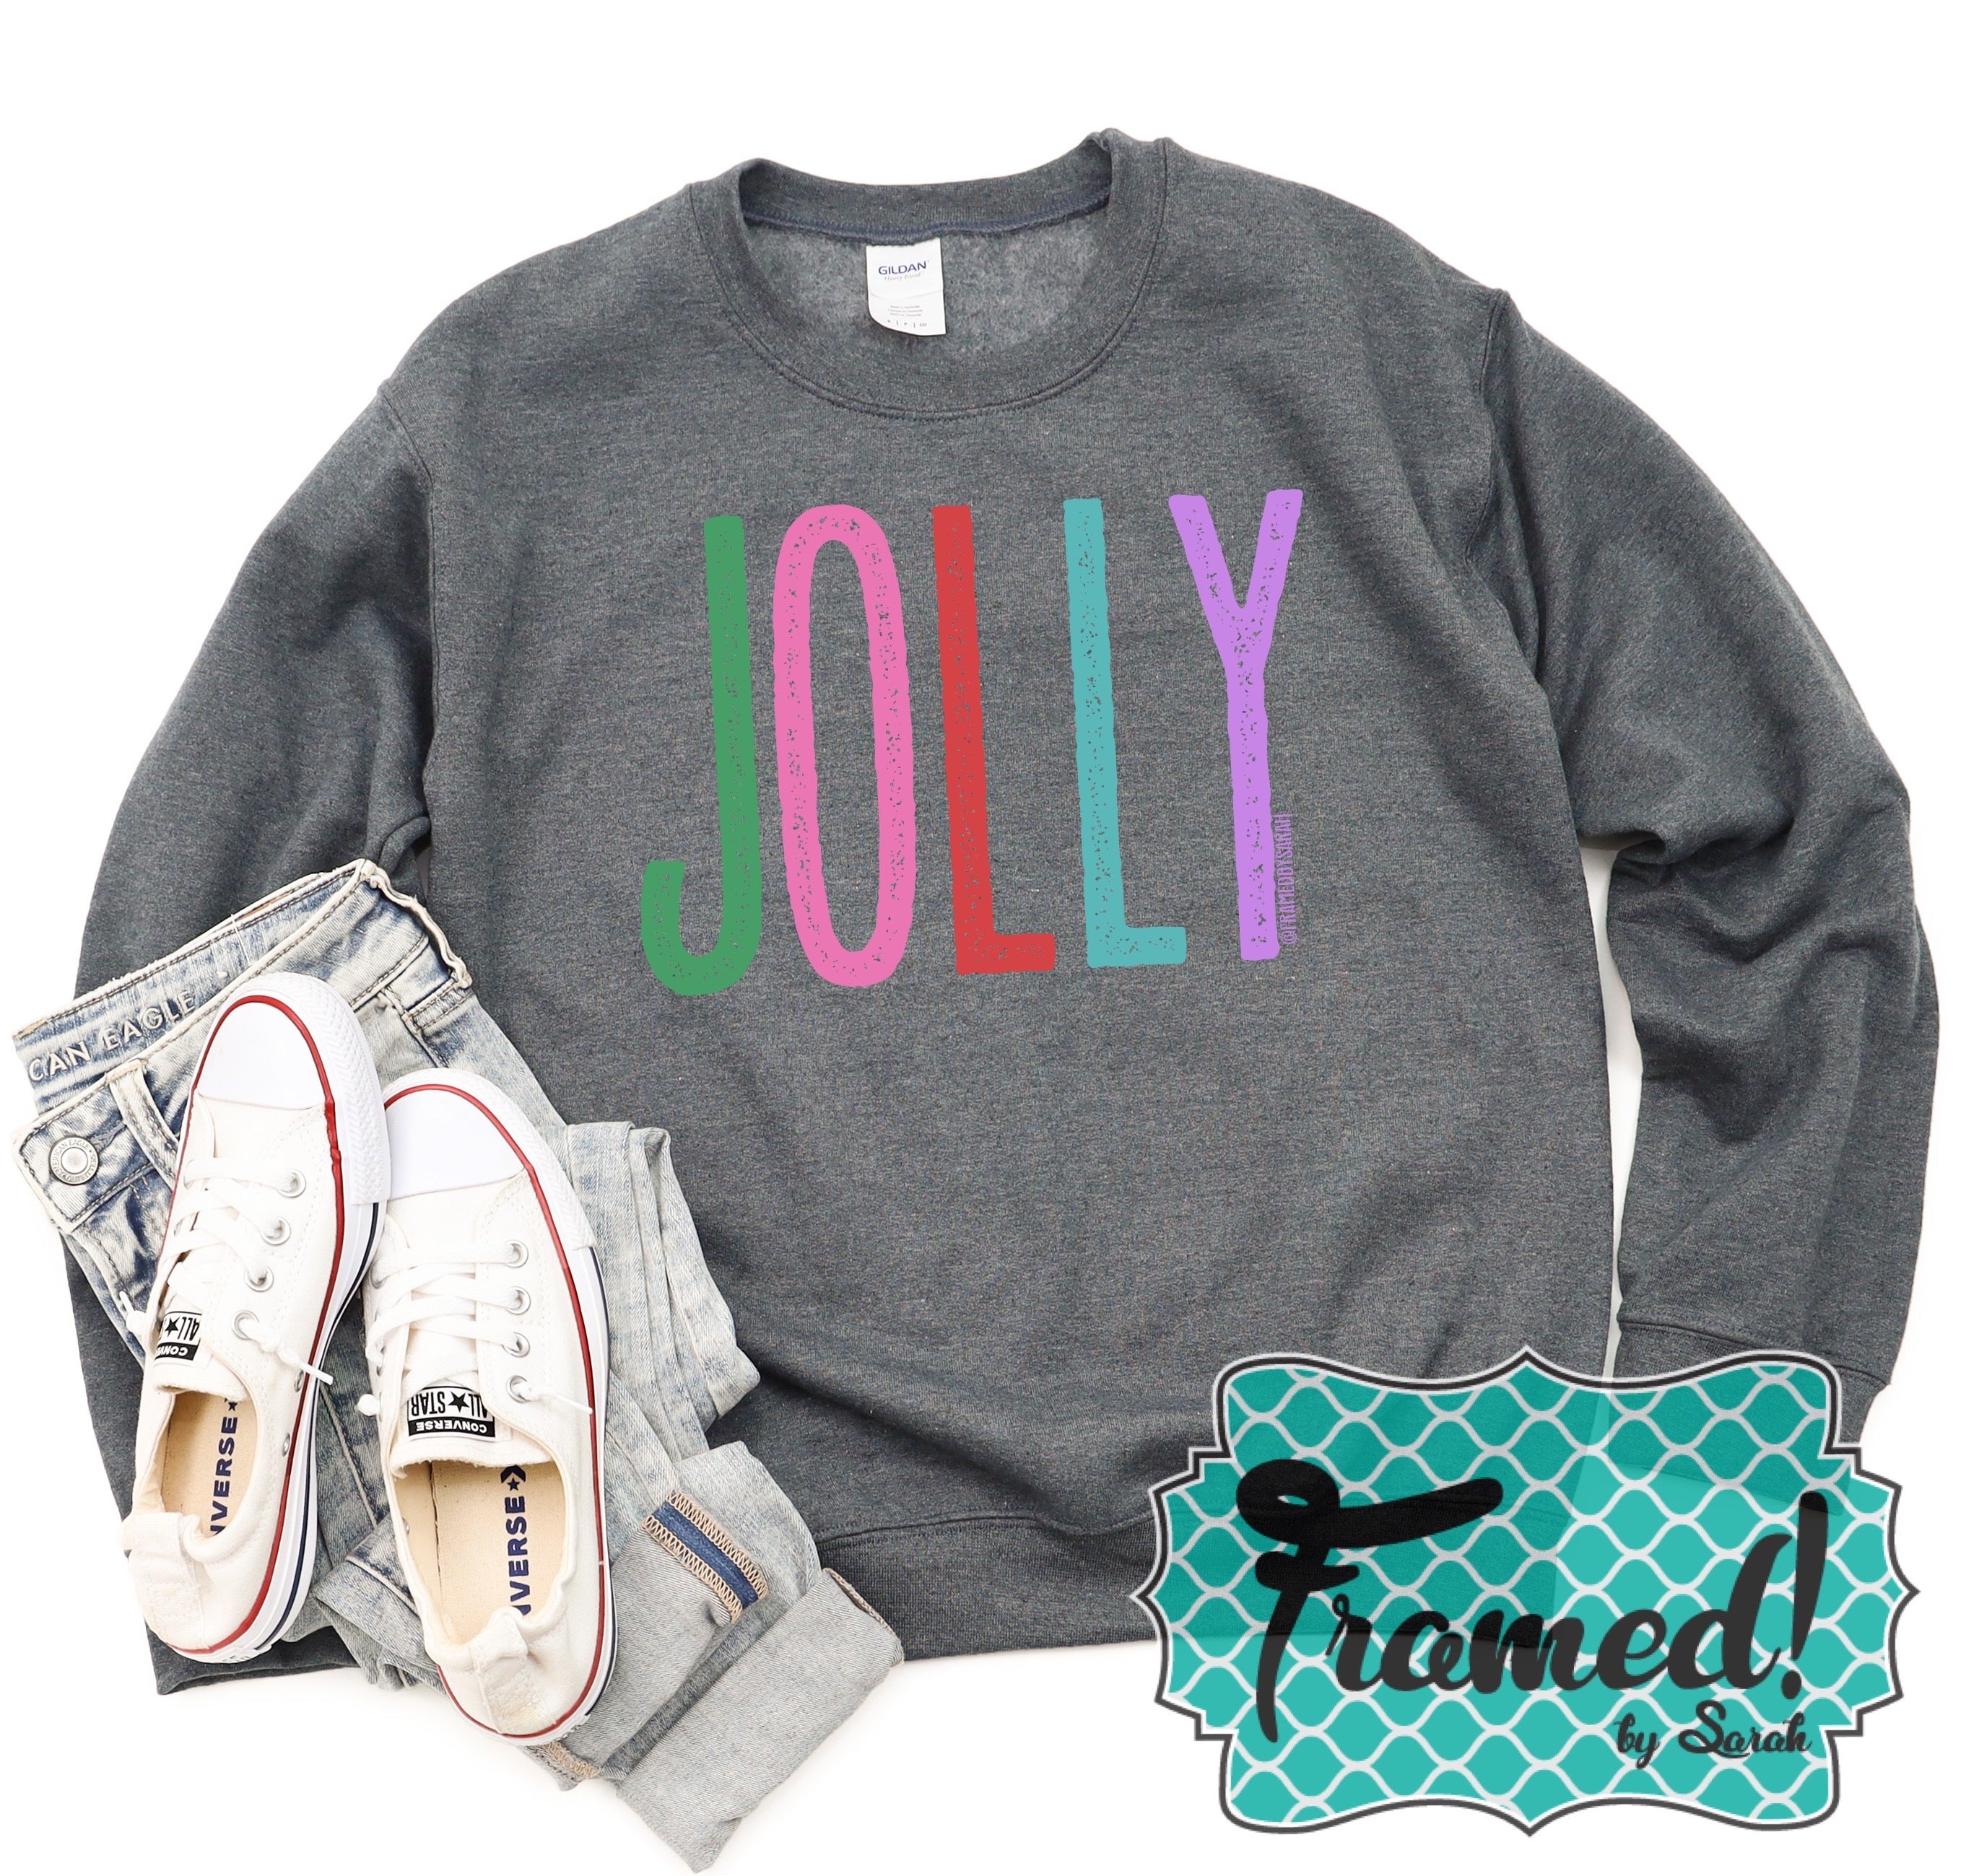 Are you Jolly or Merry? Sweatshirt (XL Only)